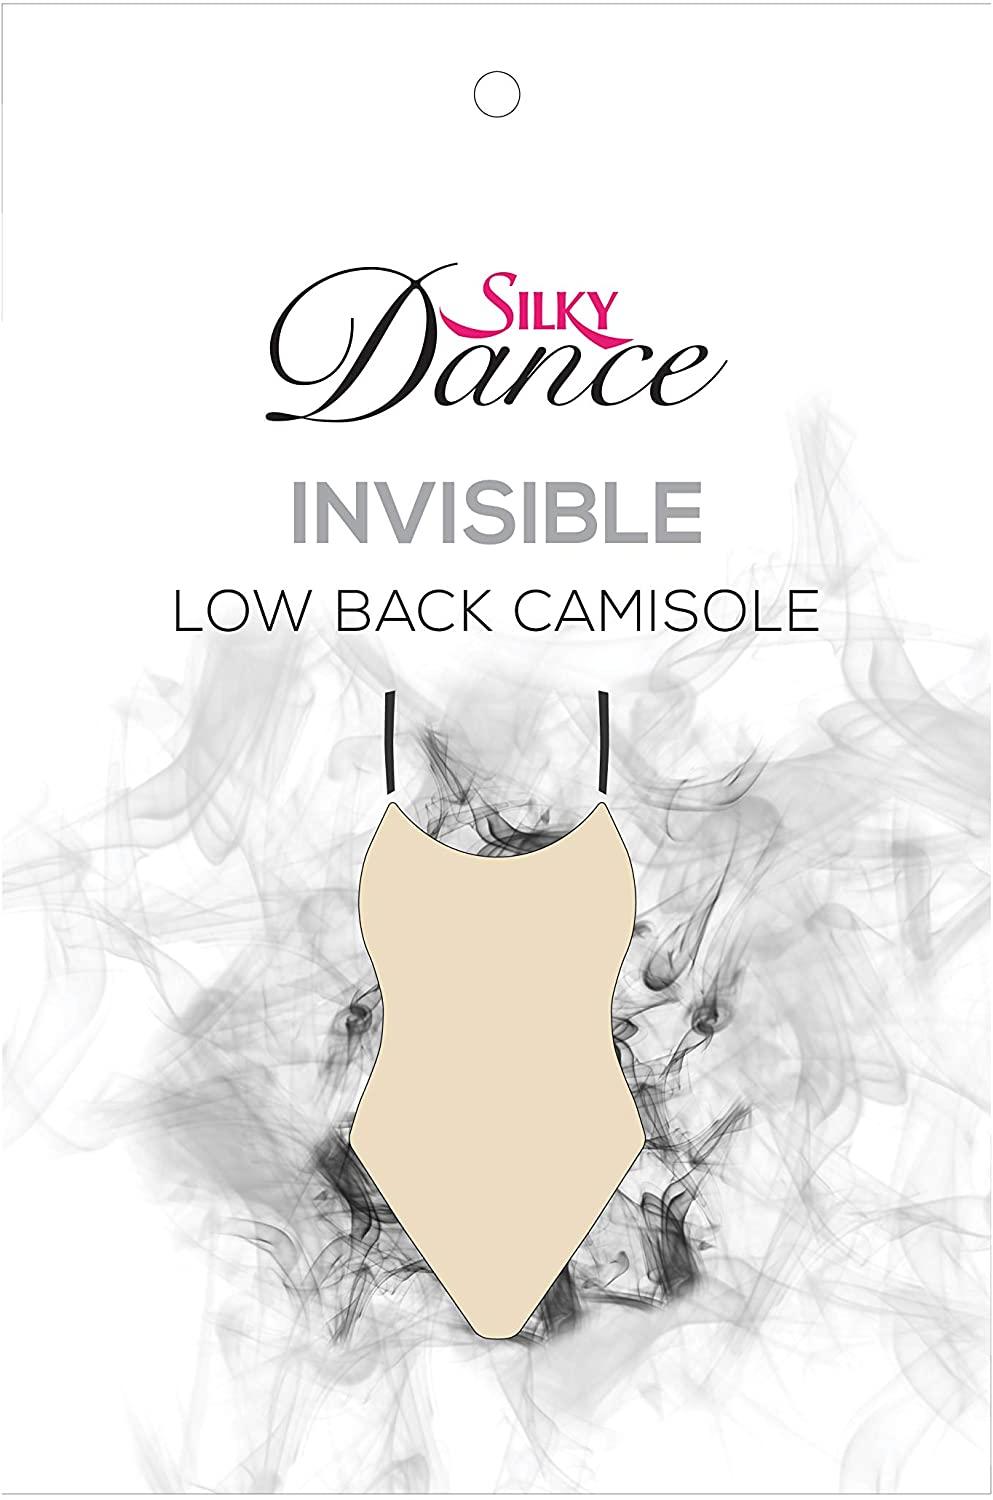 Silky Dance Girls Womens Invisible Camisole Low Back Leotard Black